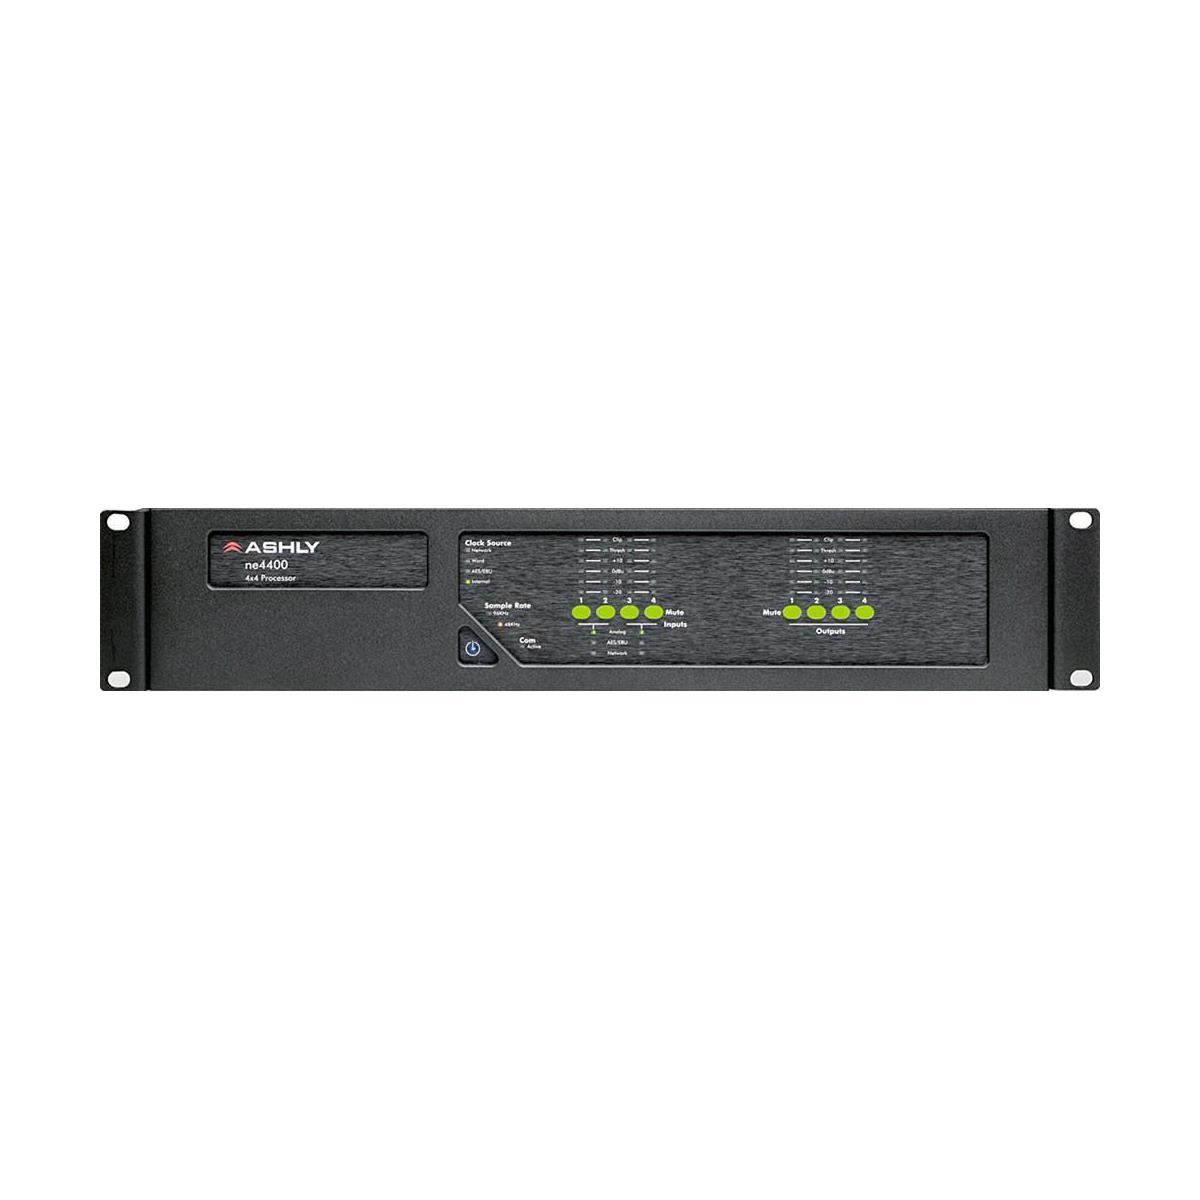 Image of Ashly ne4400 Protea DSP Audio System Processor with 4-Ch Mic In